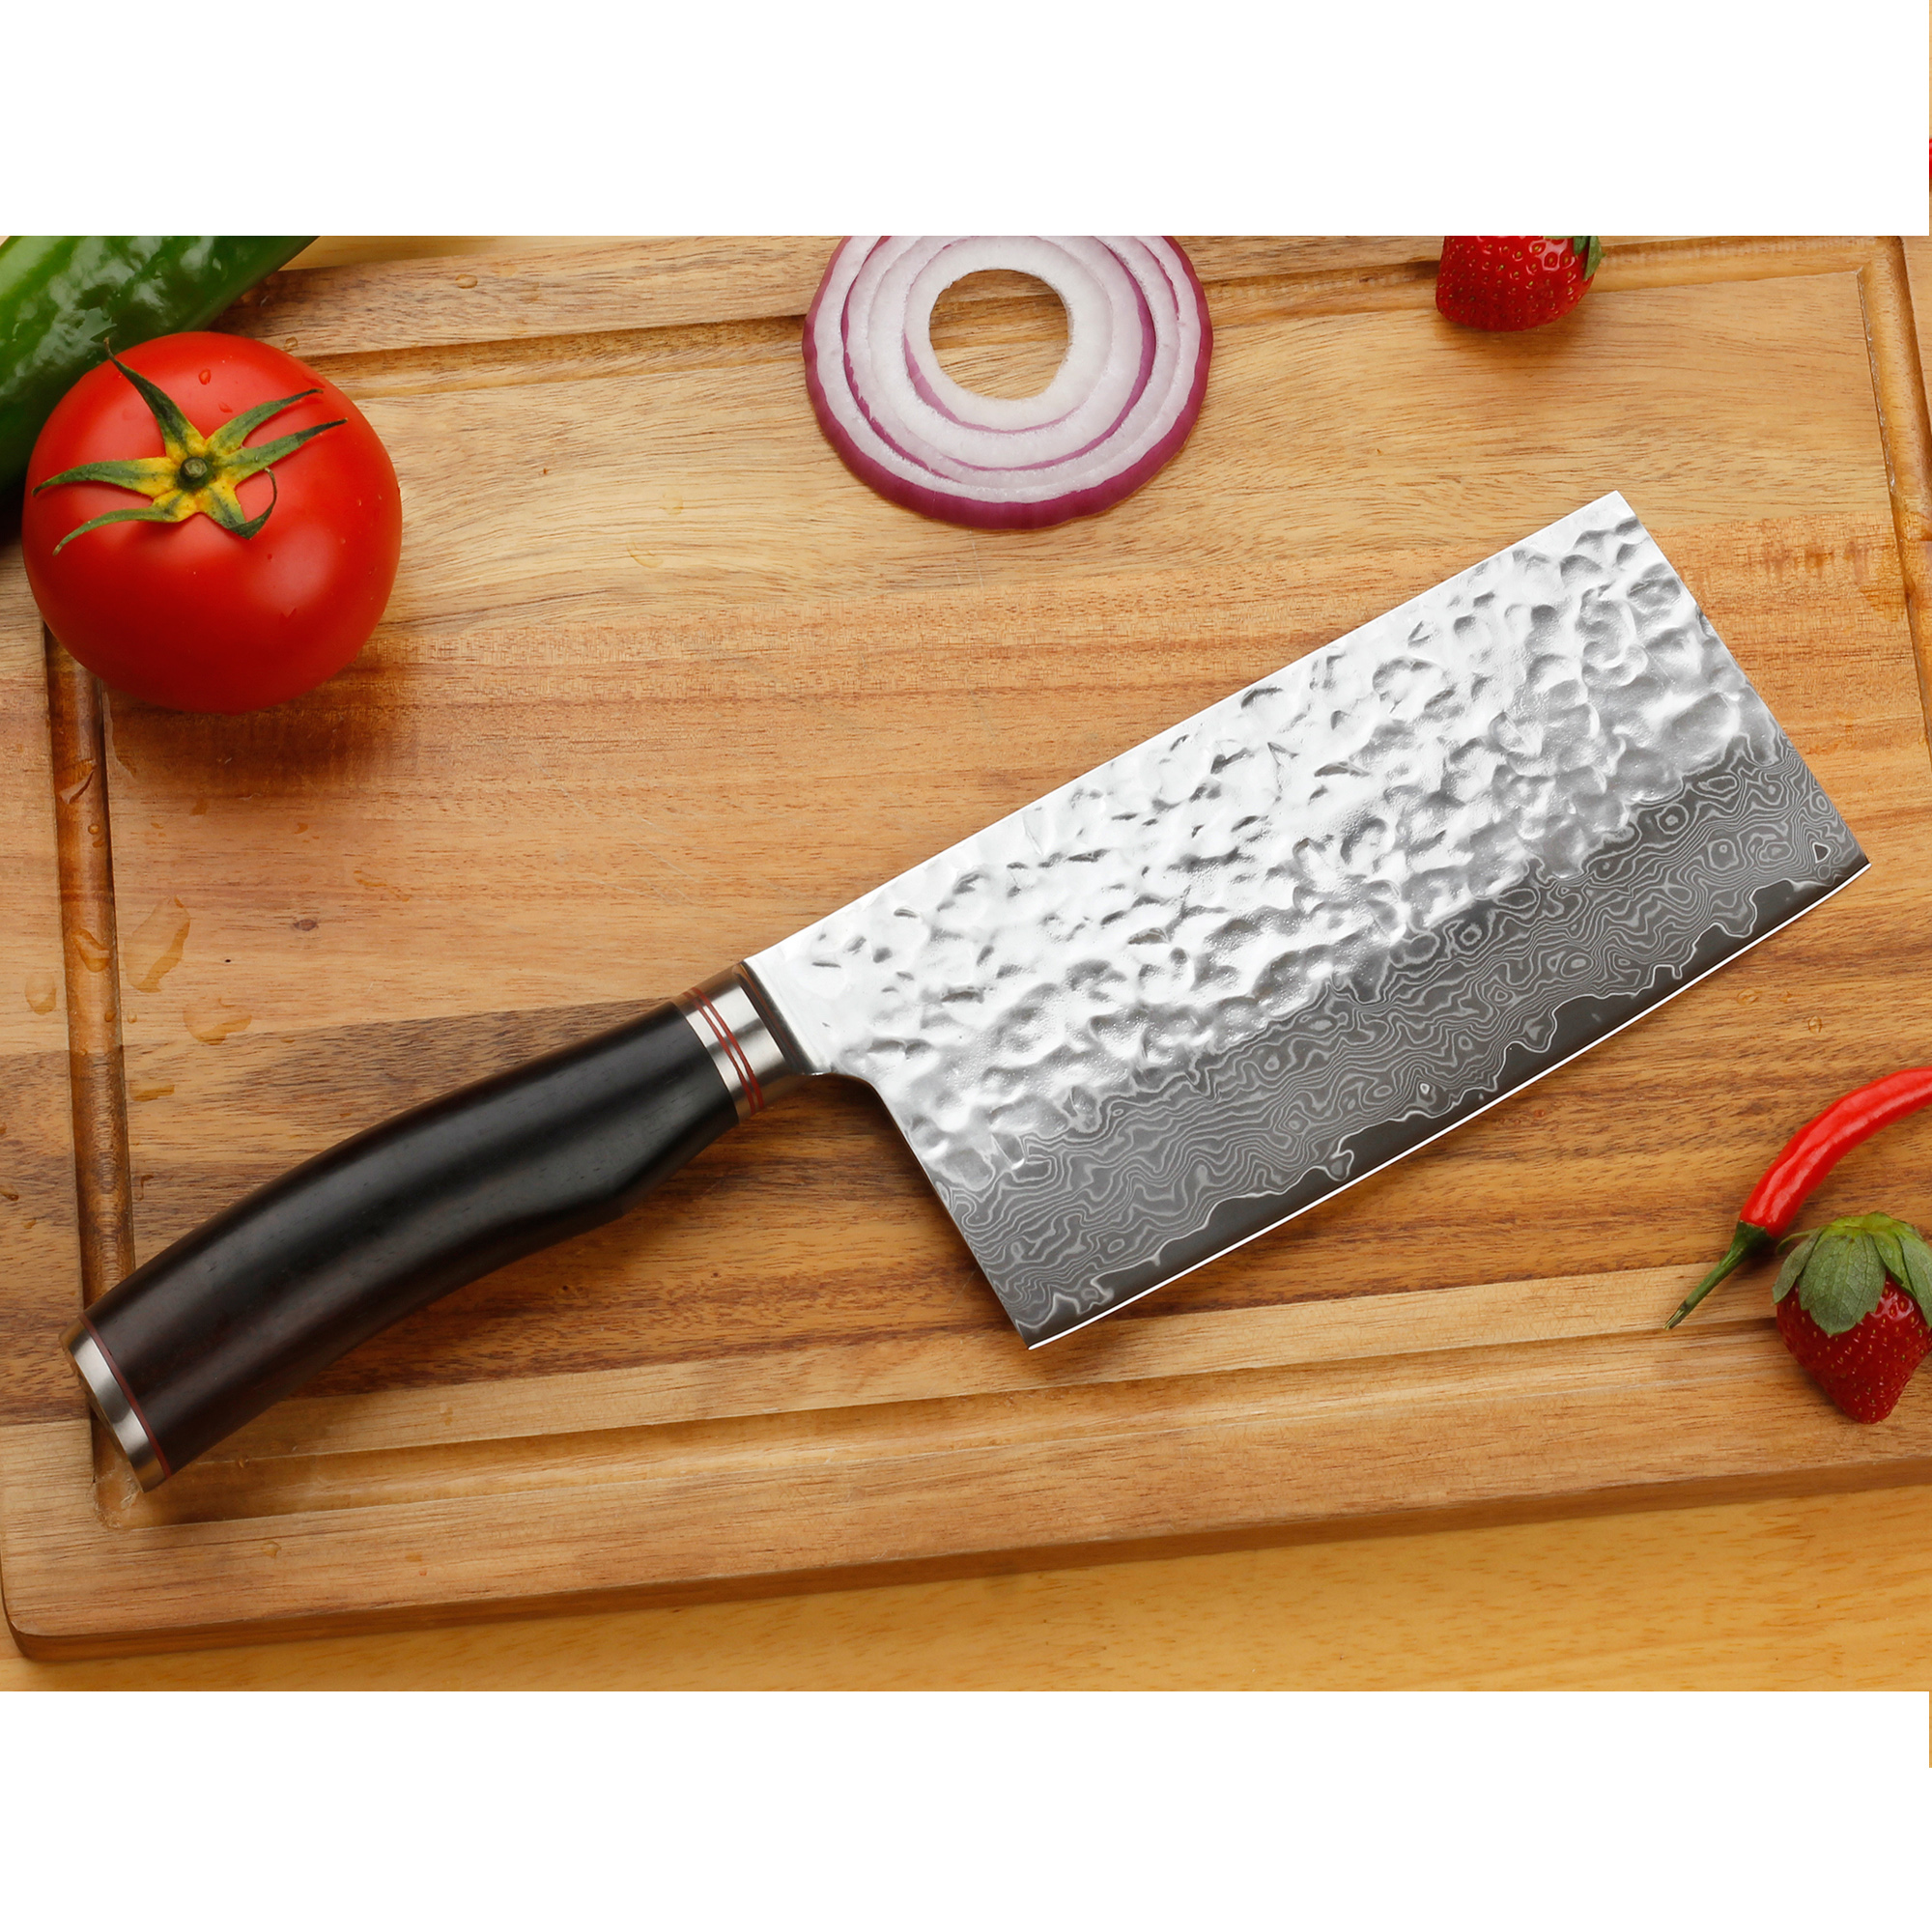 7-Inch Meat Cleaver Butcher Knife - Stainless Steel Chef Butcher Knife for Cooking - Professional 7-Inch Blade for Precision Cutting - Perfect for